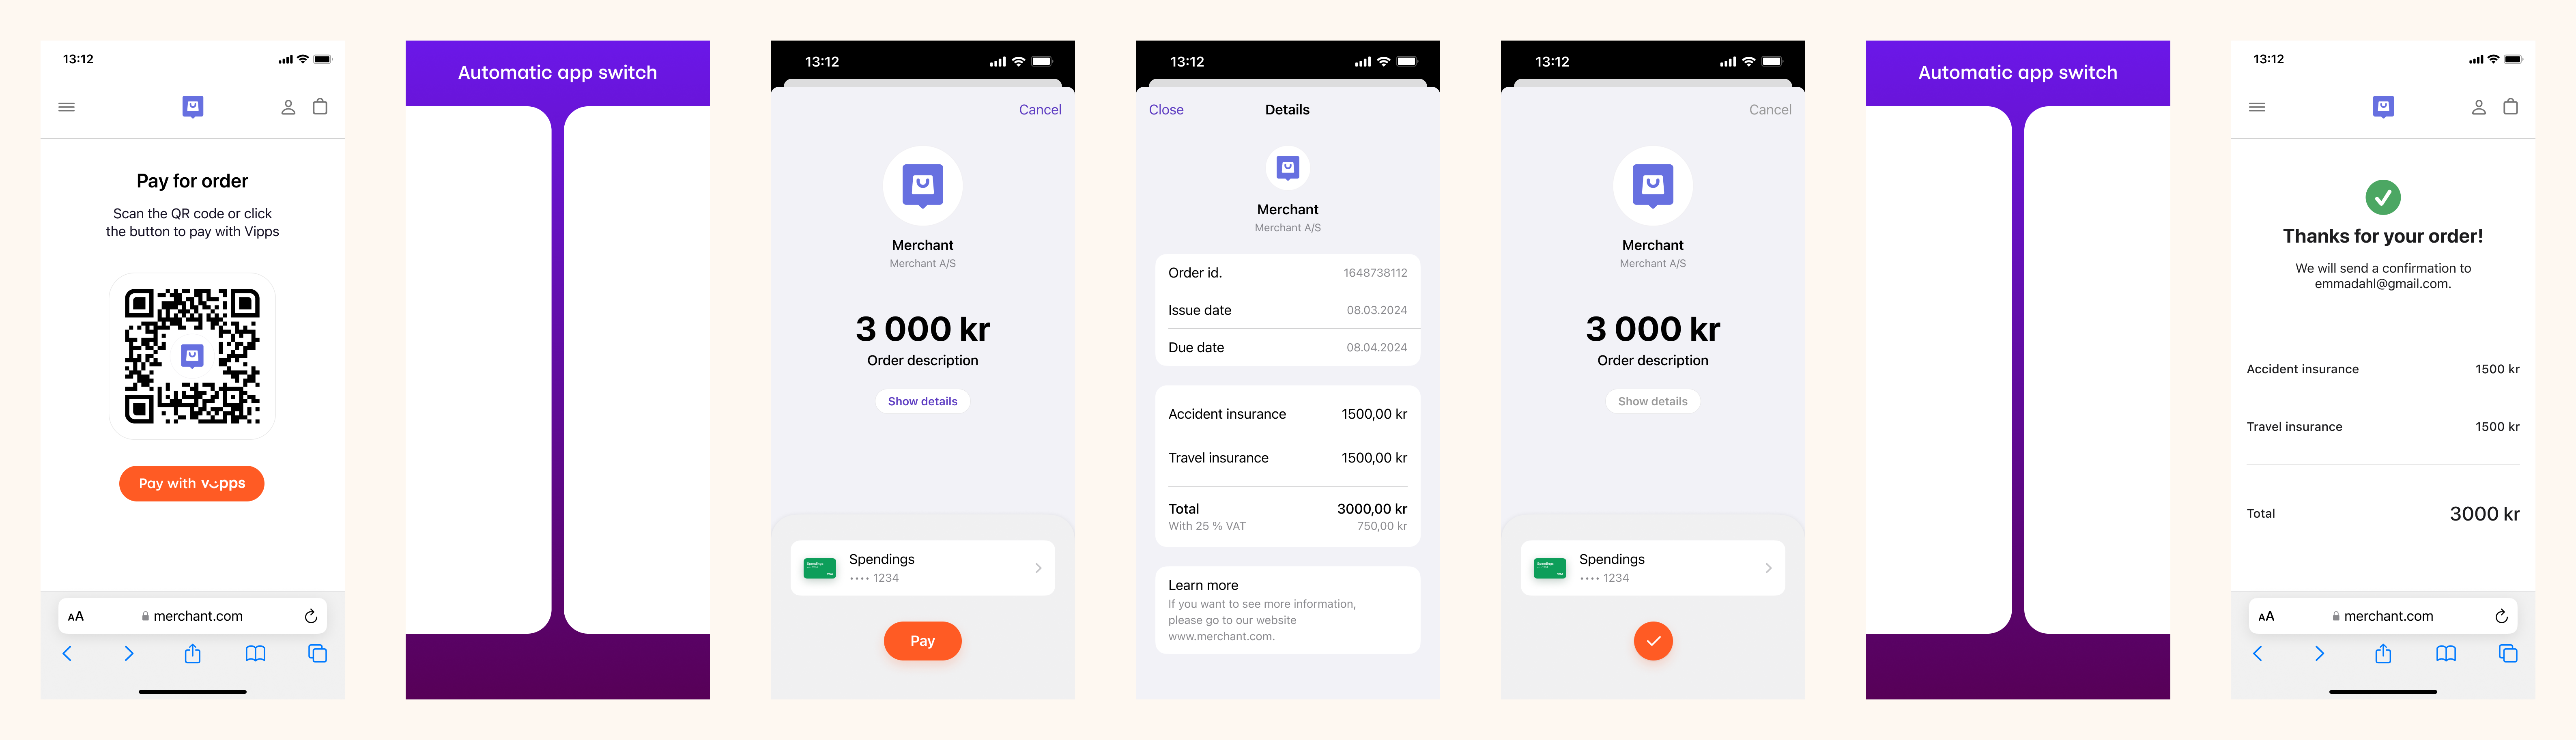 Vipps payment request landing page flow